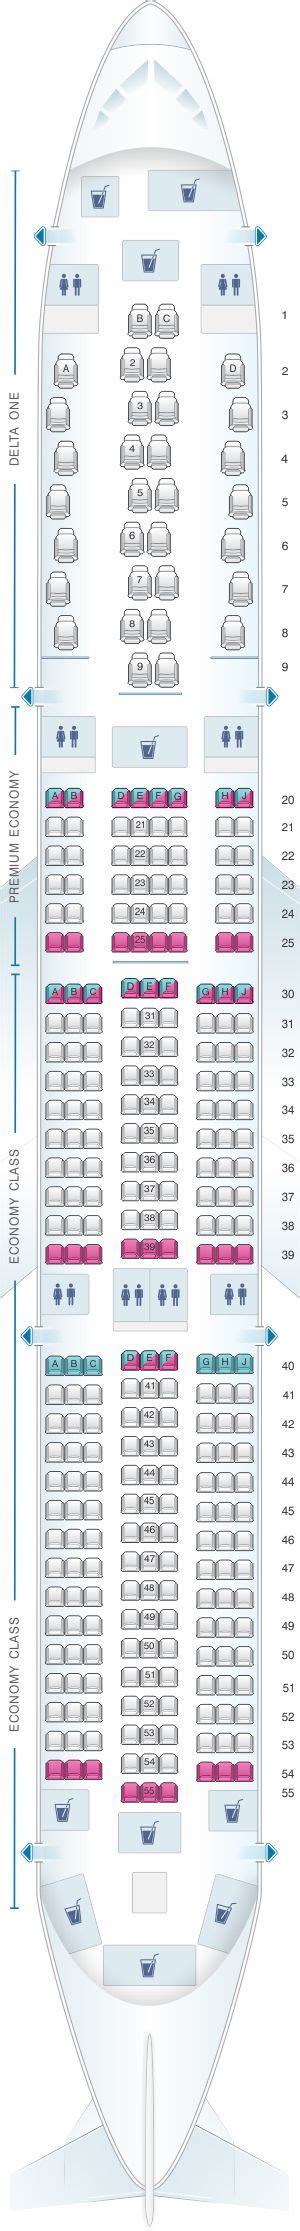 Seat Map Airbus A350 900 Asiana Airlines Srilankan Airlines China